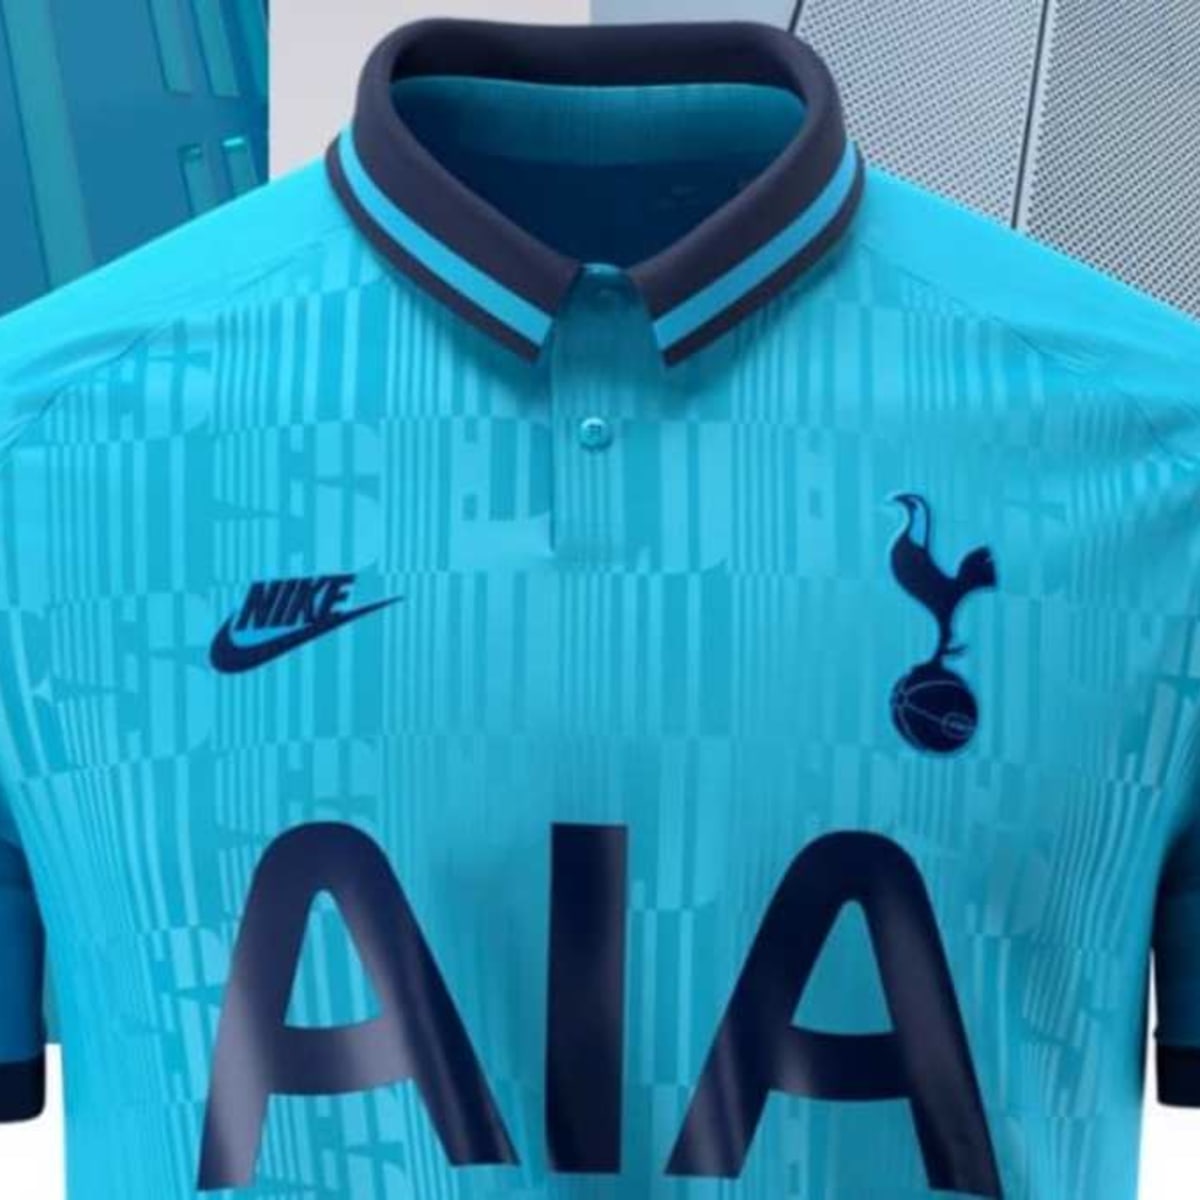 Tottenham's colourful new Nike third shirt appears for sale online